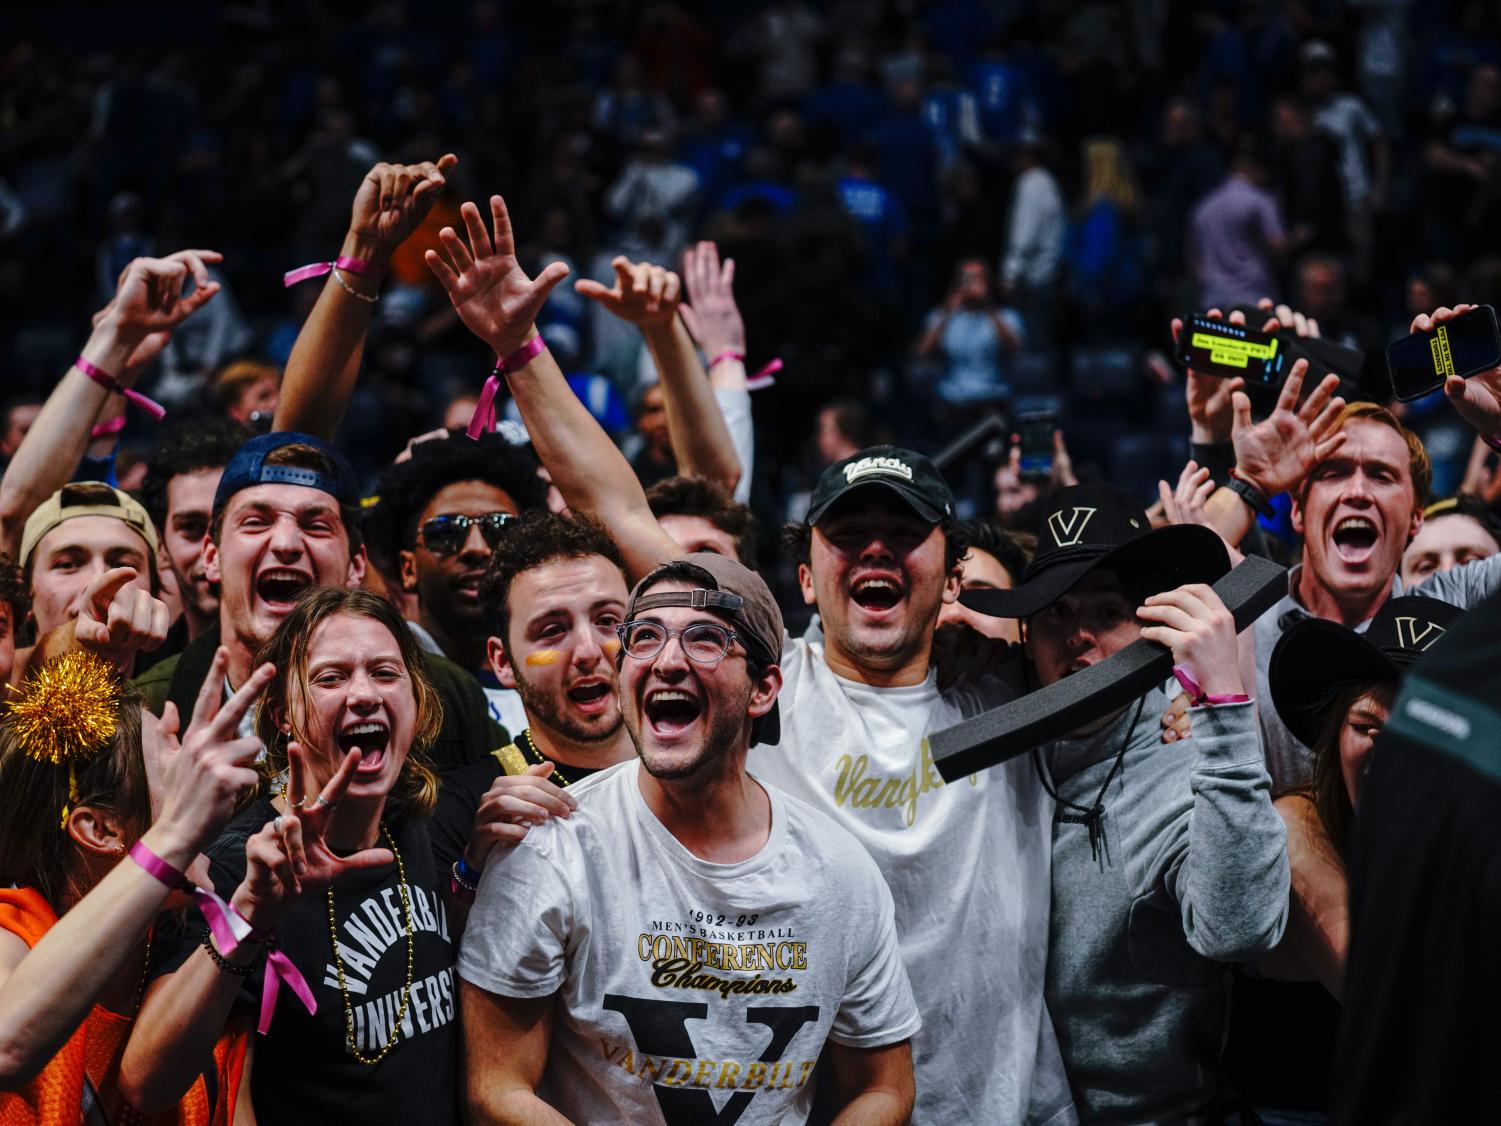 A crowd of excited Commodores celebrating Vanderbilt's win post-game, as photographed on March 10, 2023. (Hustler Multimedia/Ophelia Lu)